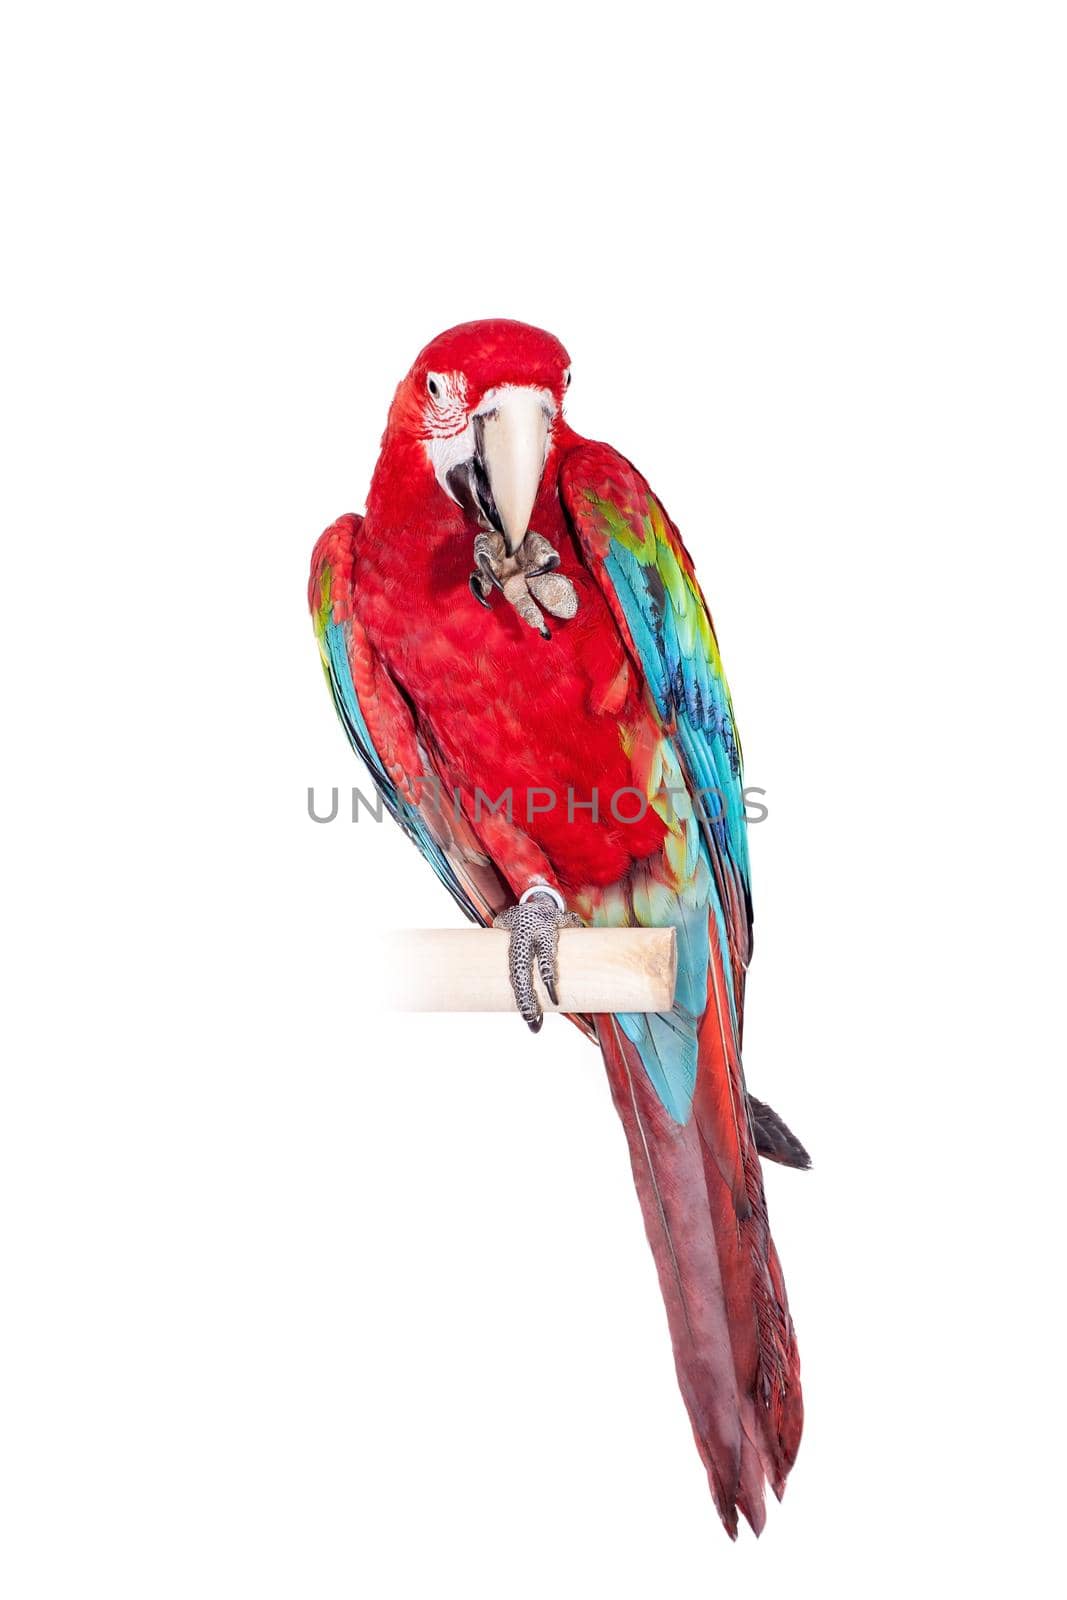 Red-and-green Macaw - Ara chloropterus, isolated over white background